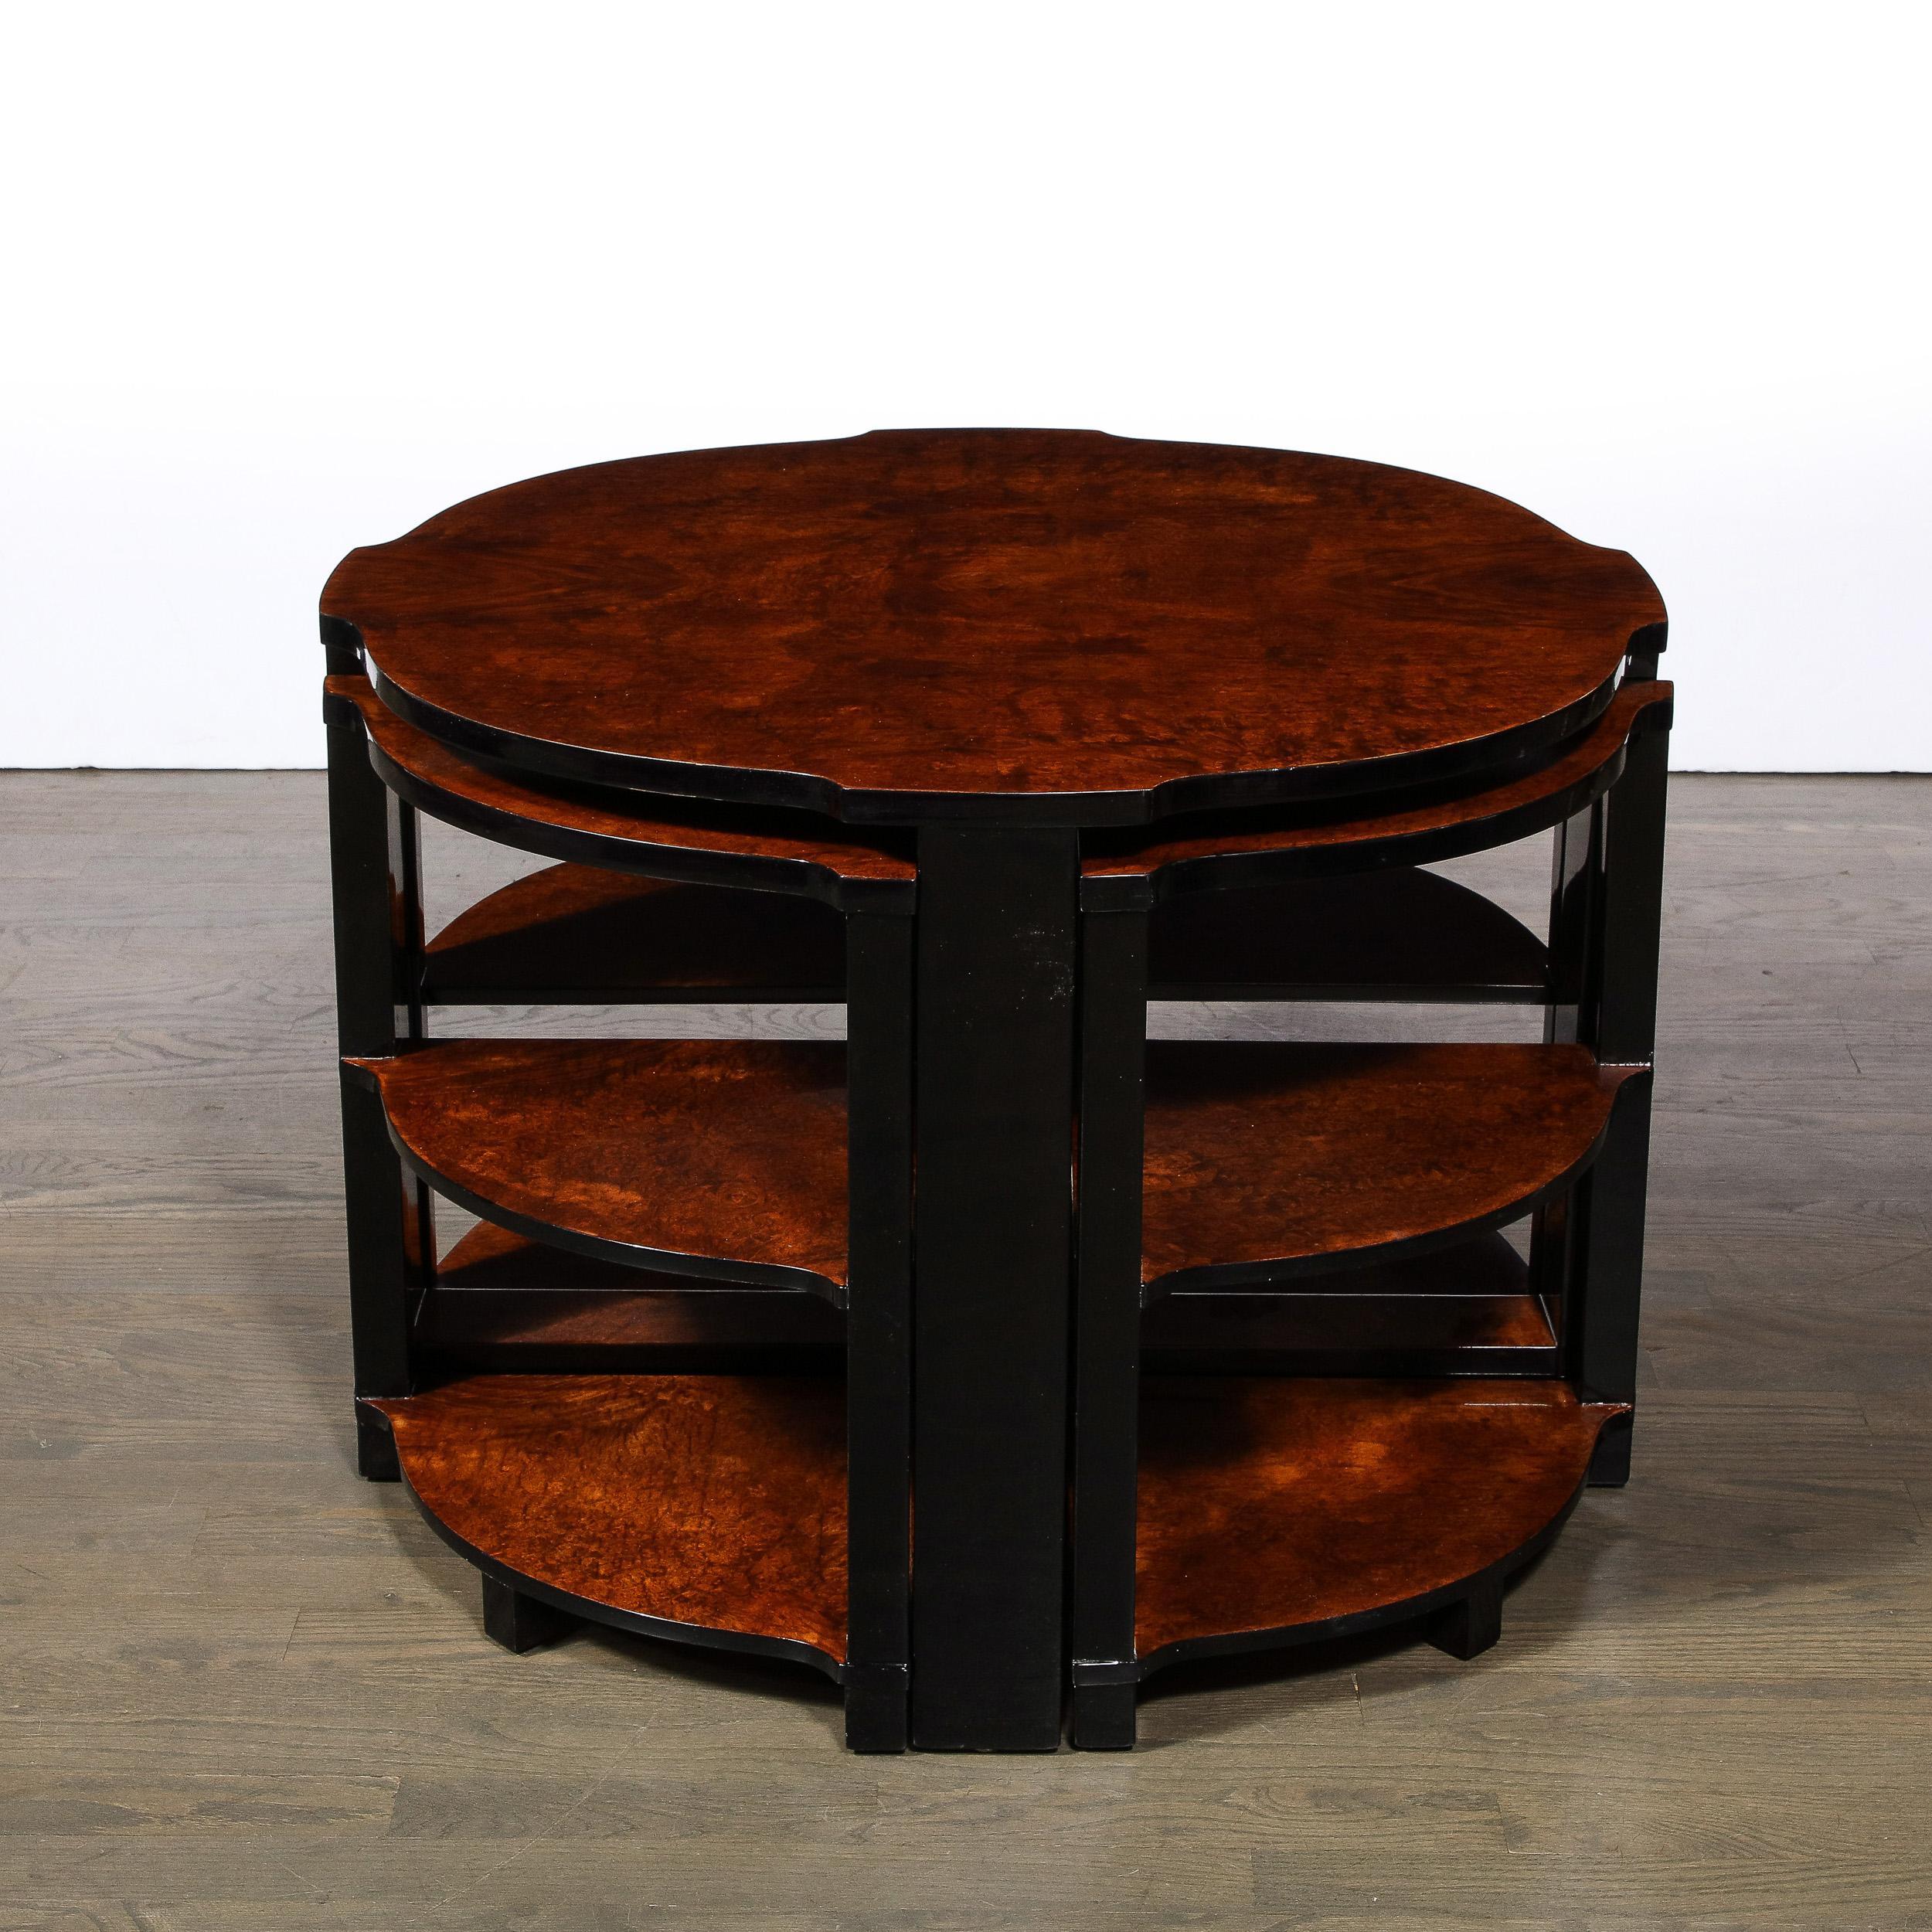 French Art Deco Three-Tier Occasional Table w/ Four Nested Tables in Bookmatched Walnut